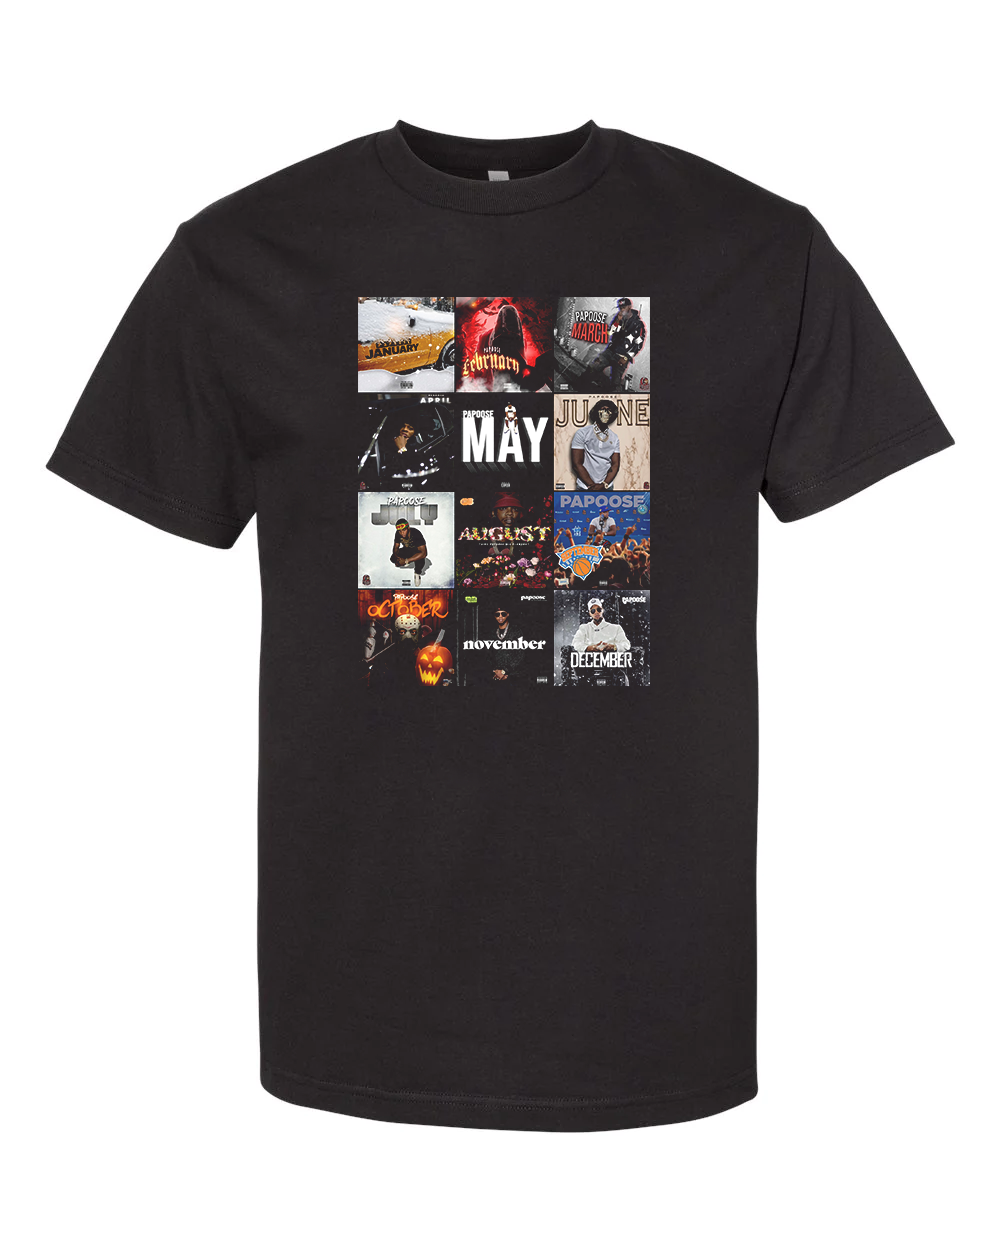 All Album Covers T-Shirt